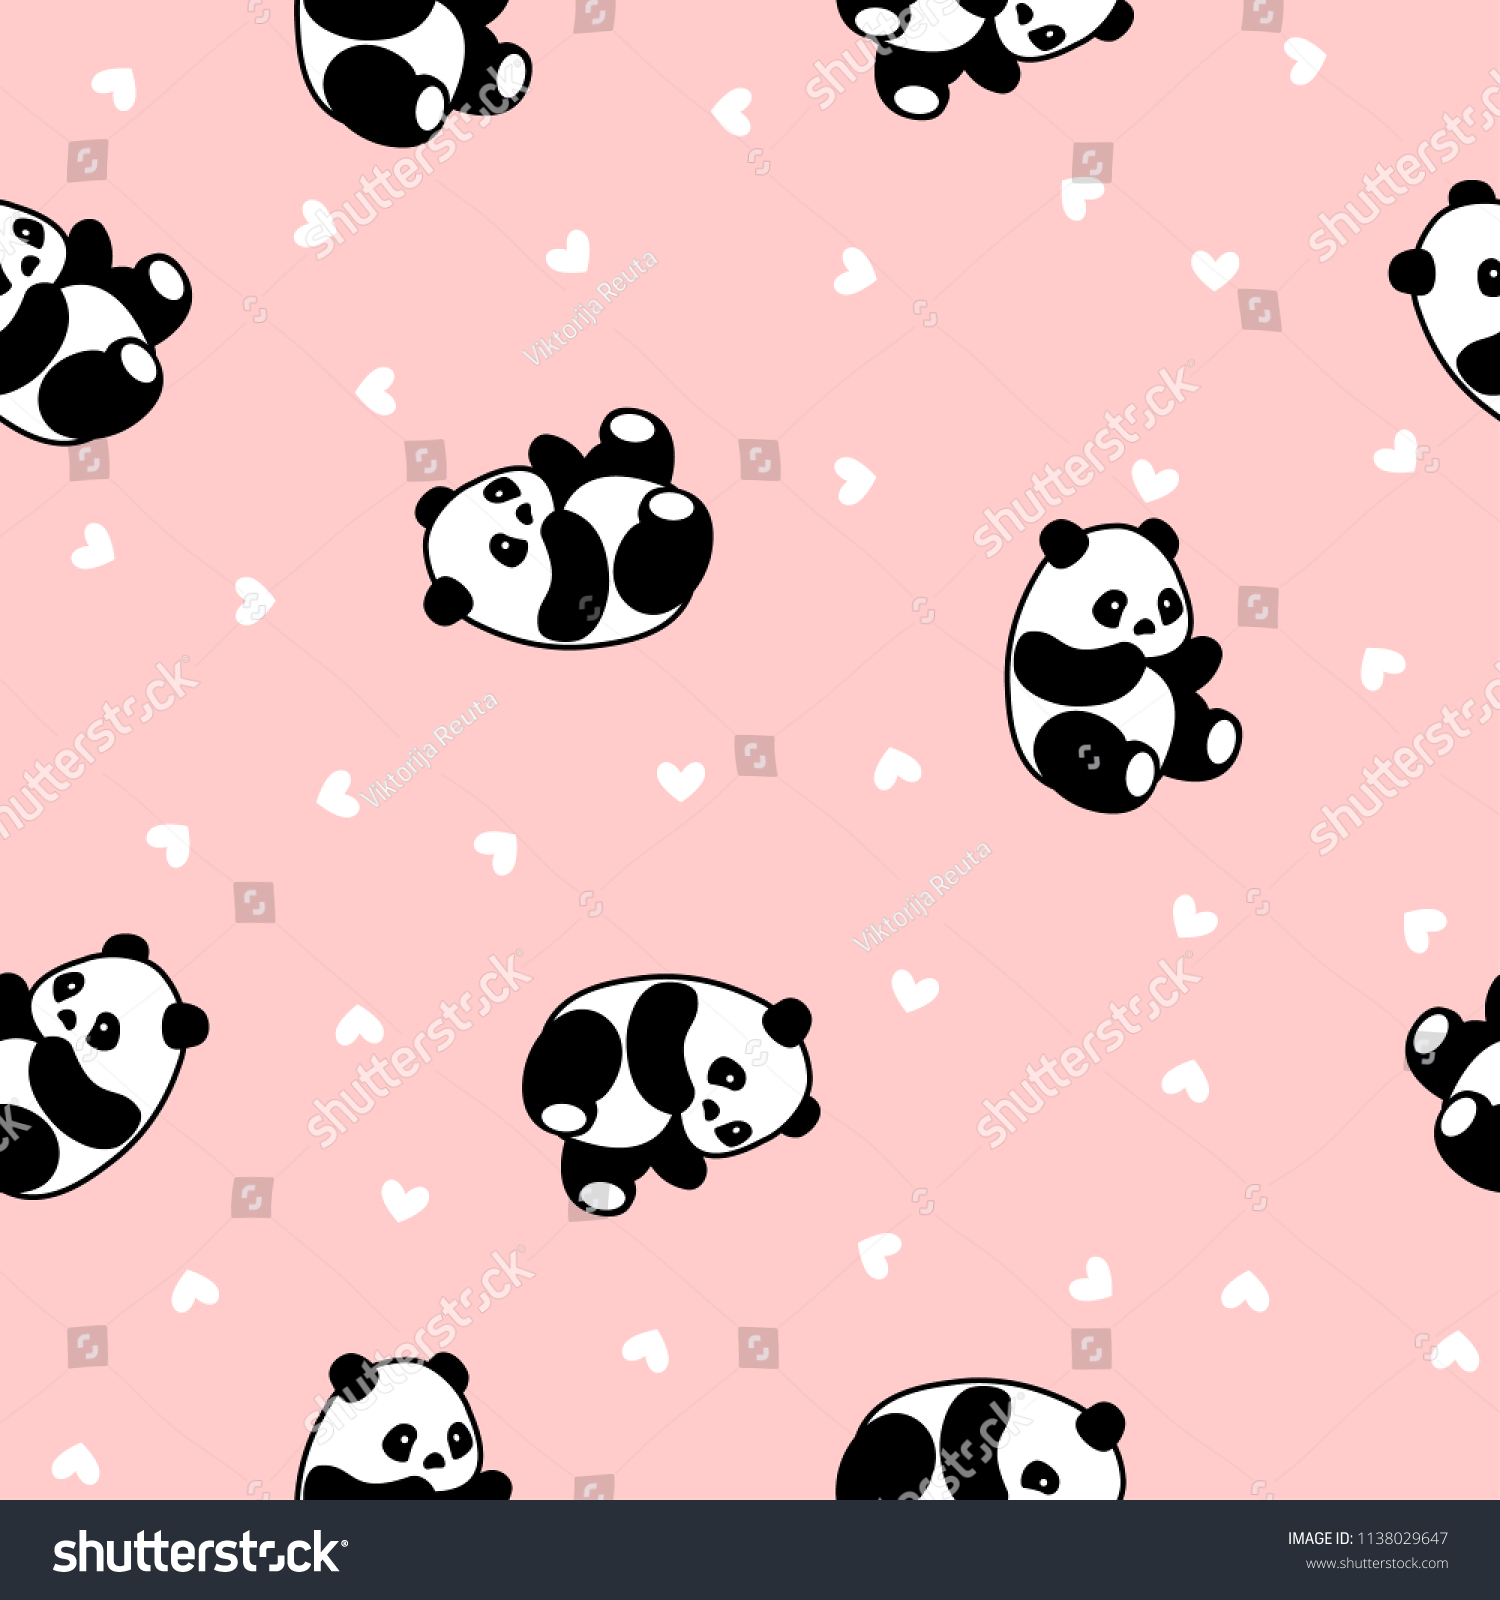 SVG of Cute Panda Seamless Pattern, Animal Background with hearts for Kids svg